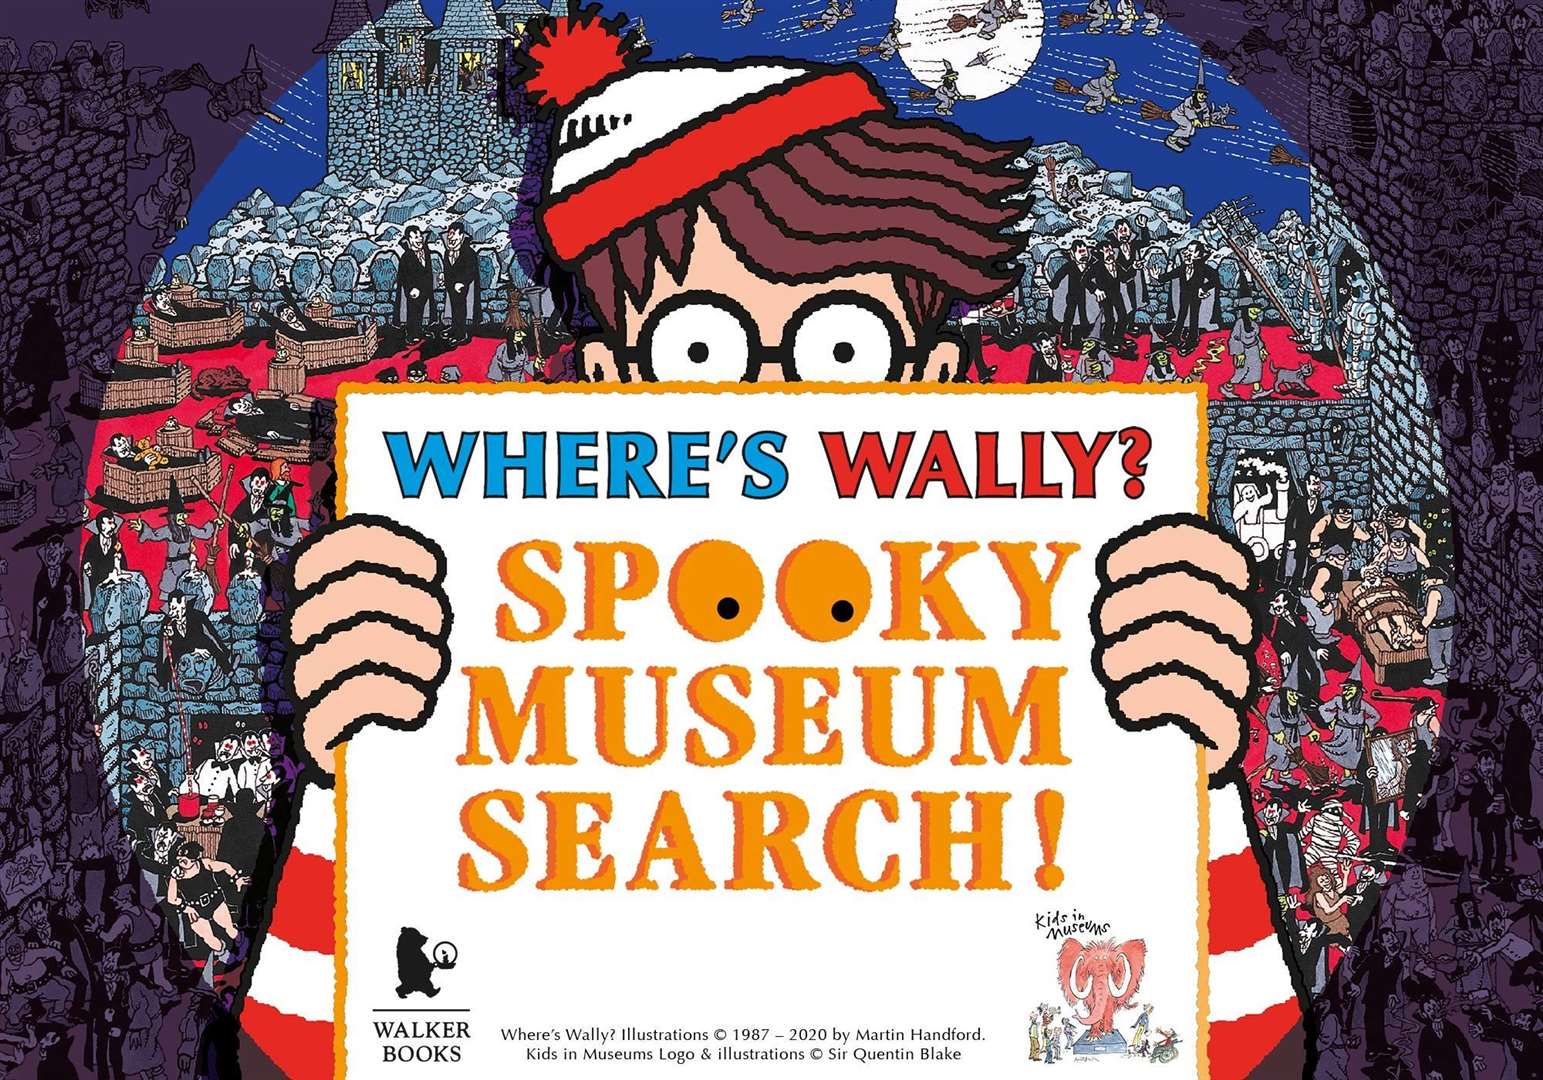 Where's Wally Spooky Museum Search is coming to the Dockyard in half term